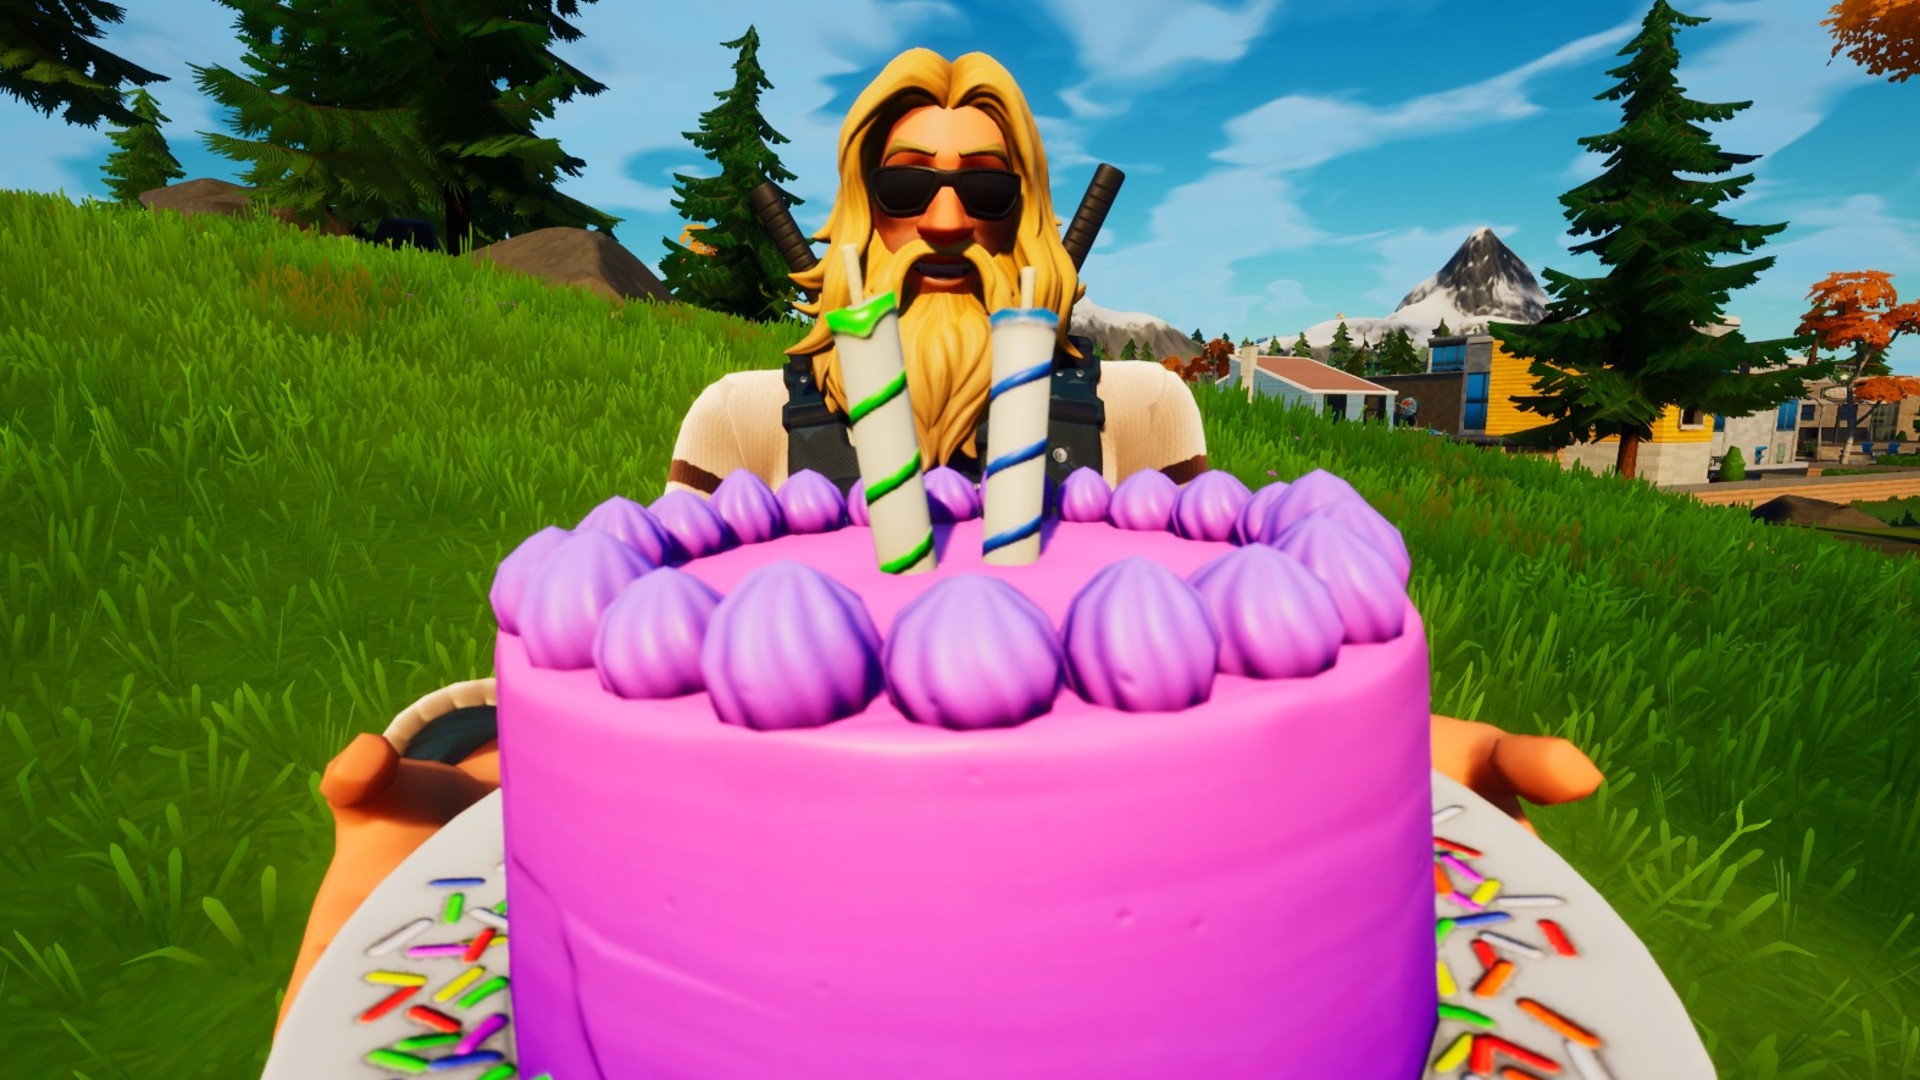  Fortnite: Where are the cakes? 